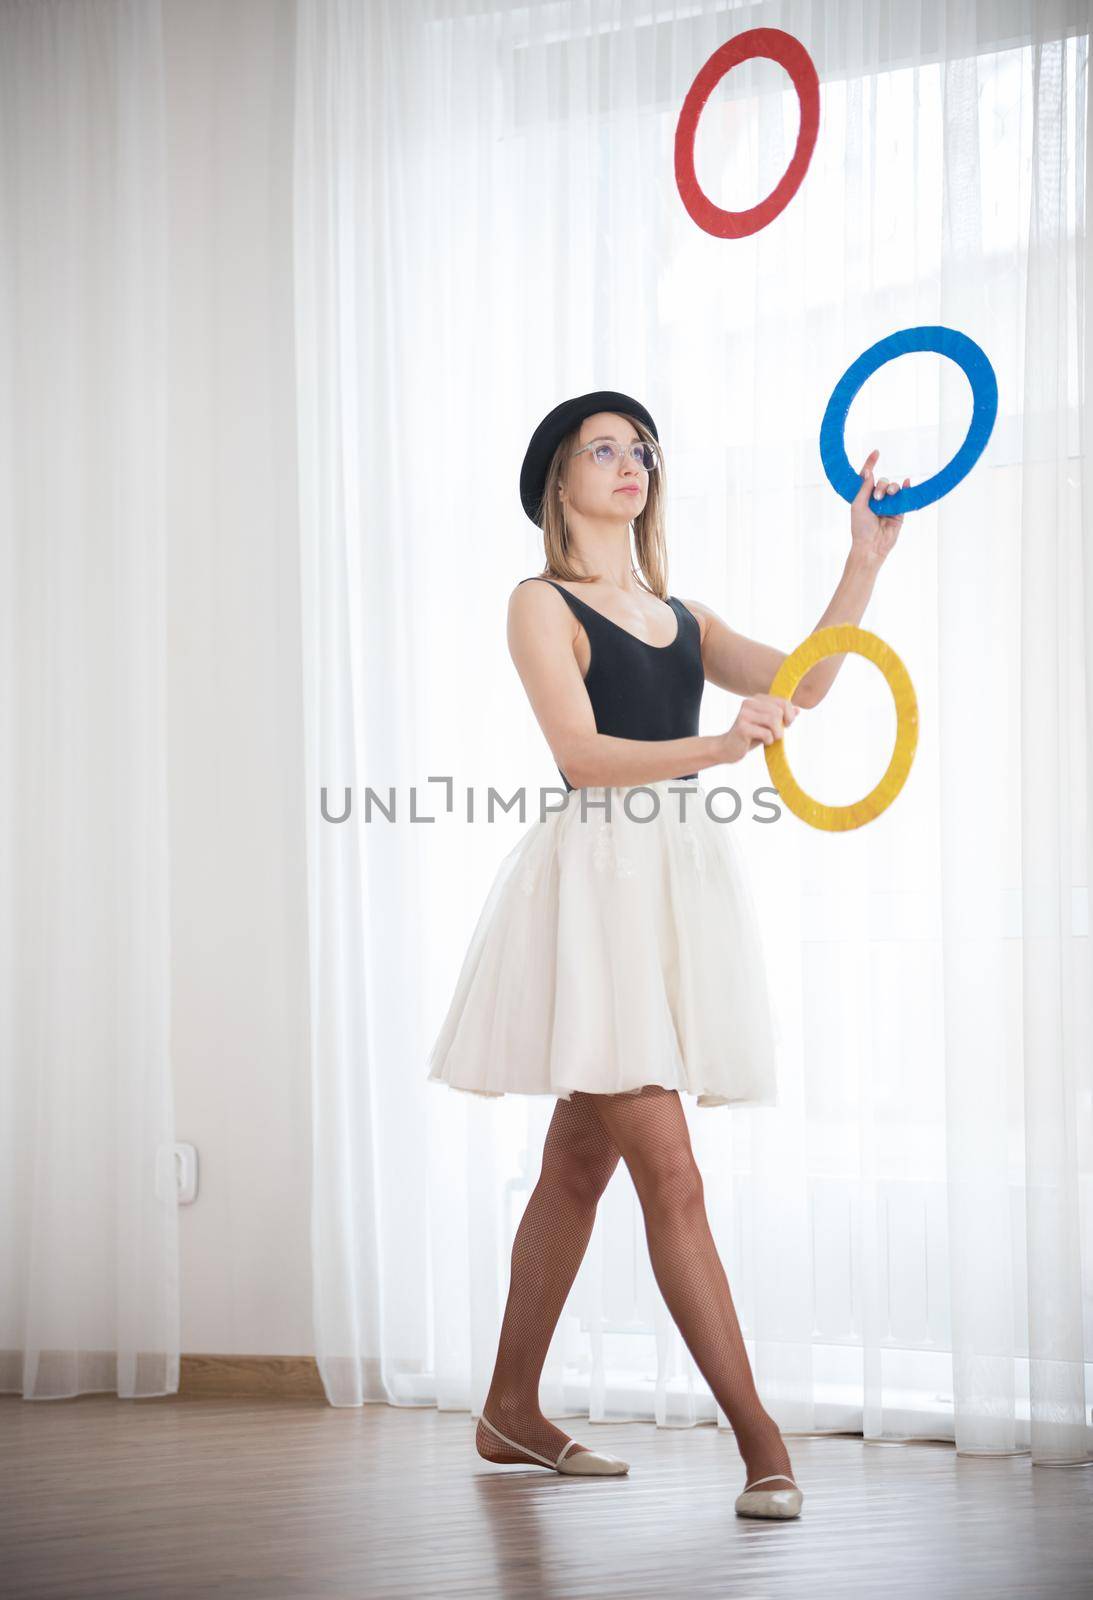 Young woman in a hat juggles with multi-colored rings in the studio, elephoto shot